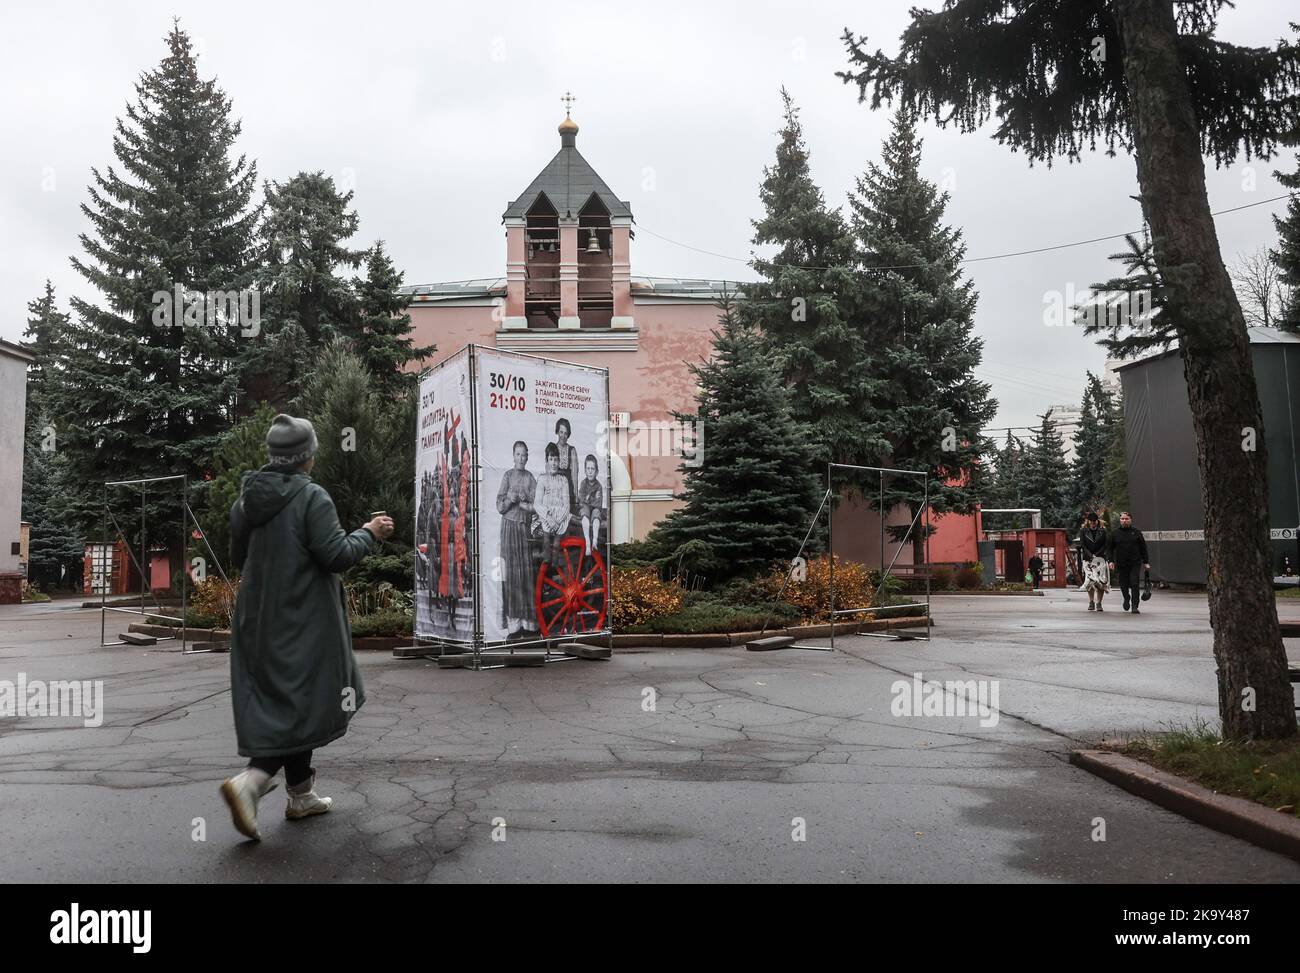 The former crematorium at the New Don Cemetery, next to the Don Monastery in Moscow. Thousands of victims of political terror in the Soviet Union were cremated here after their execution, their remains buried at the cemetery. Stock Photo